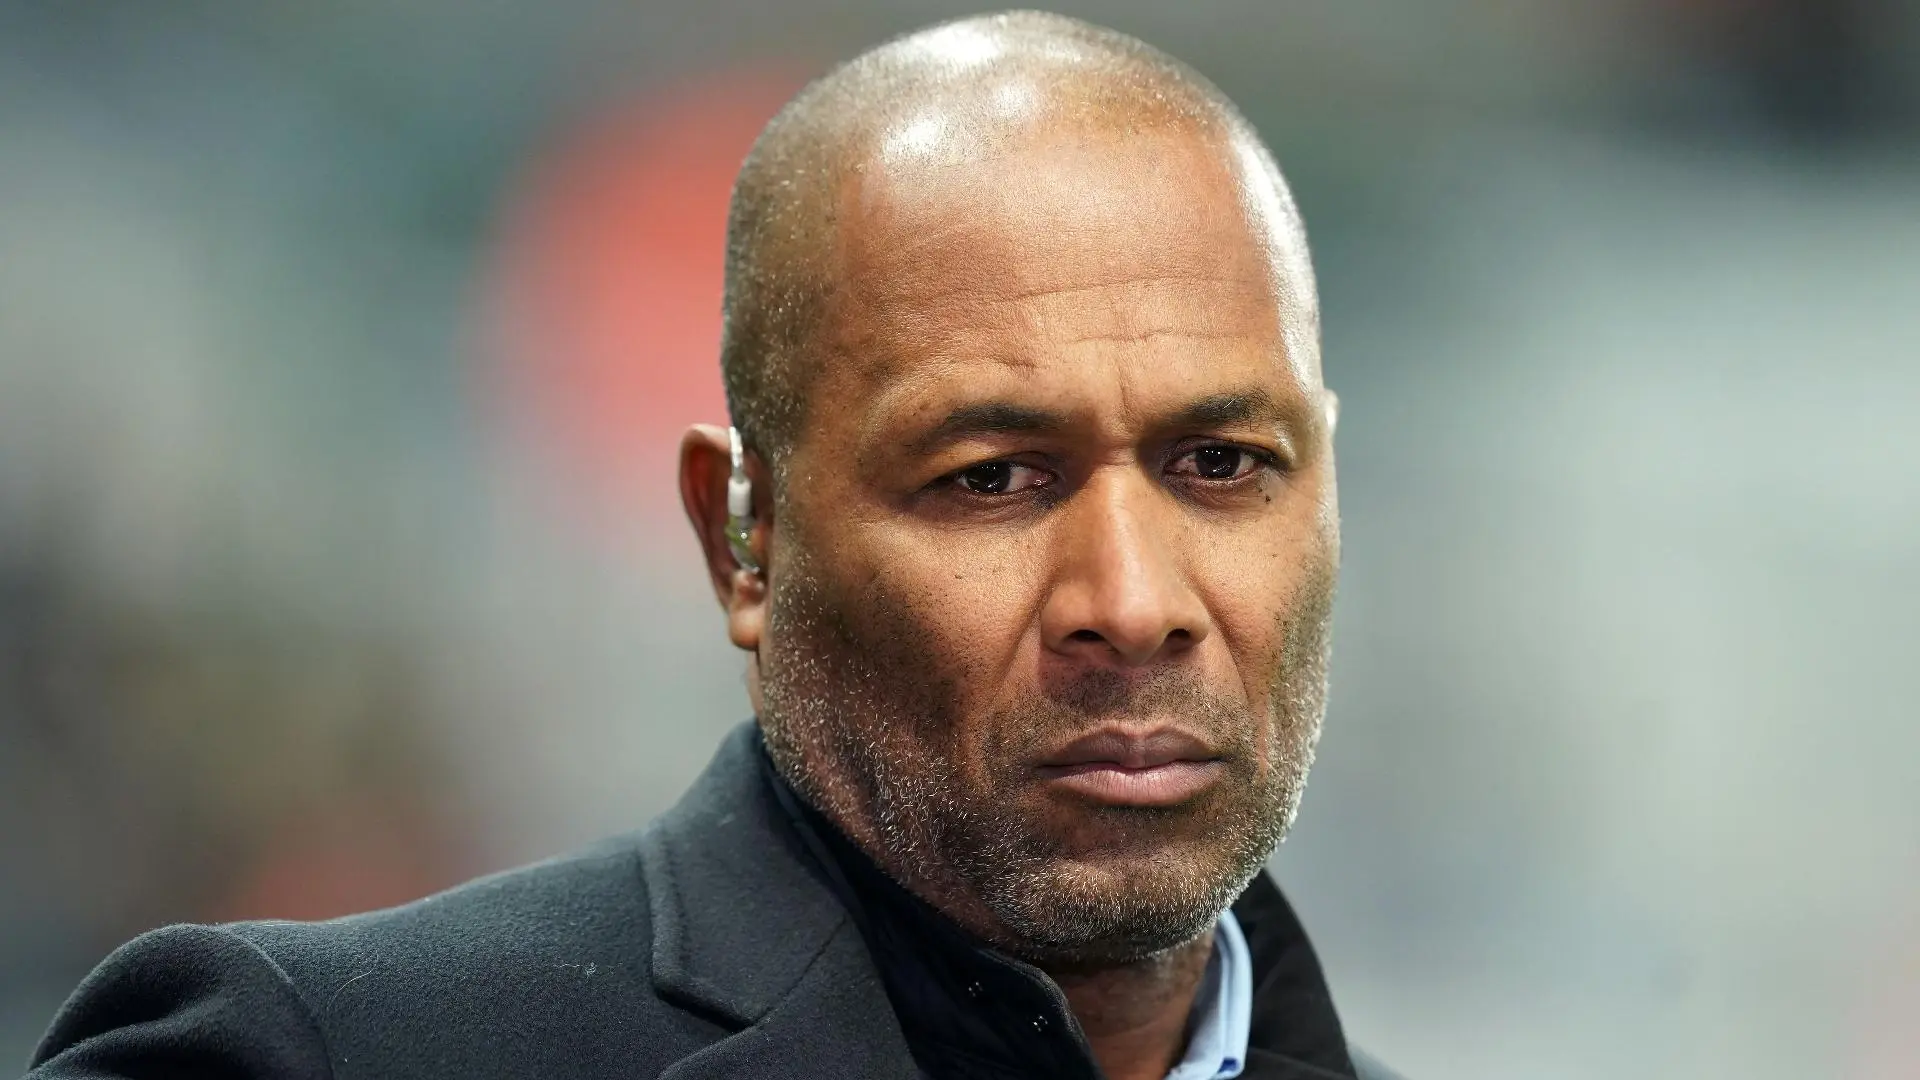 14 Intriguing Facts About Les Ferdinand - Facts.net